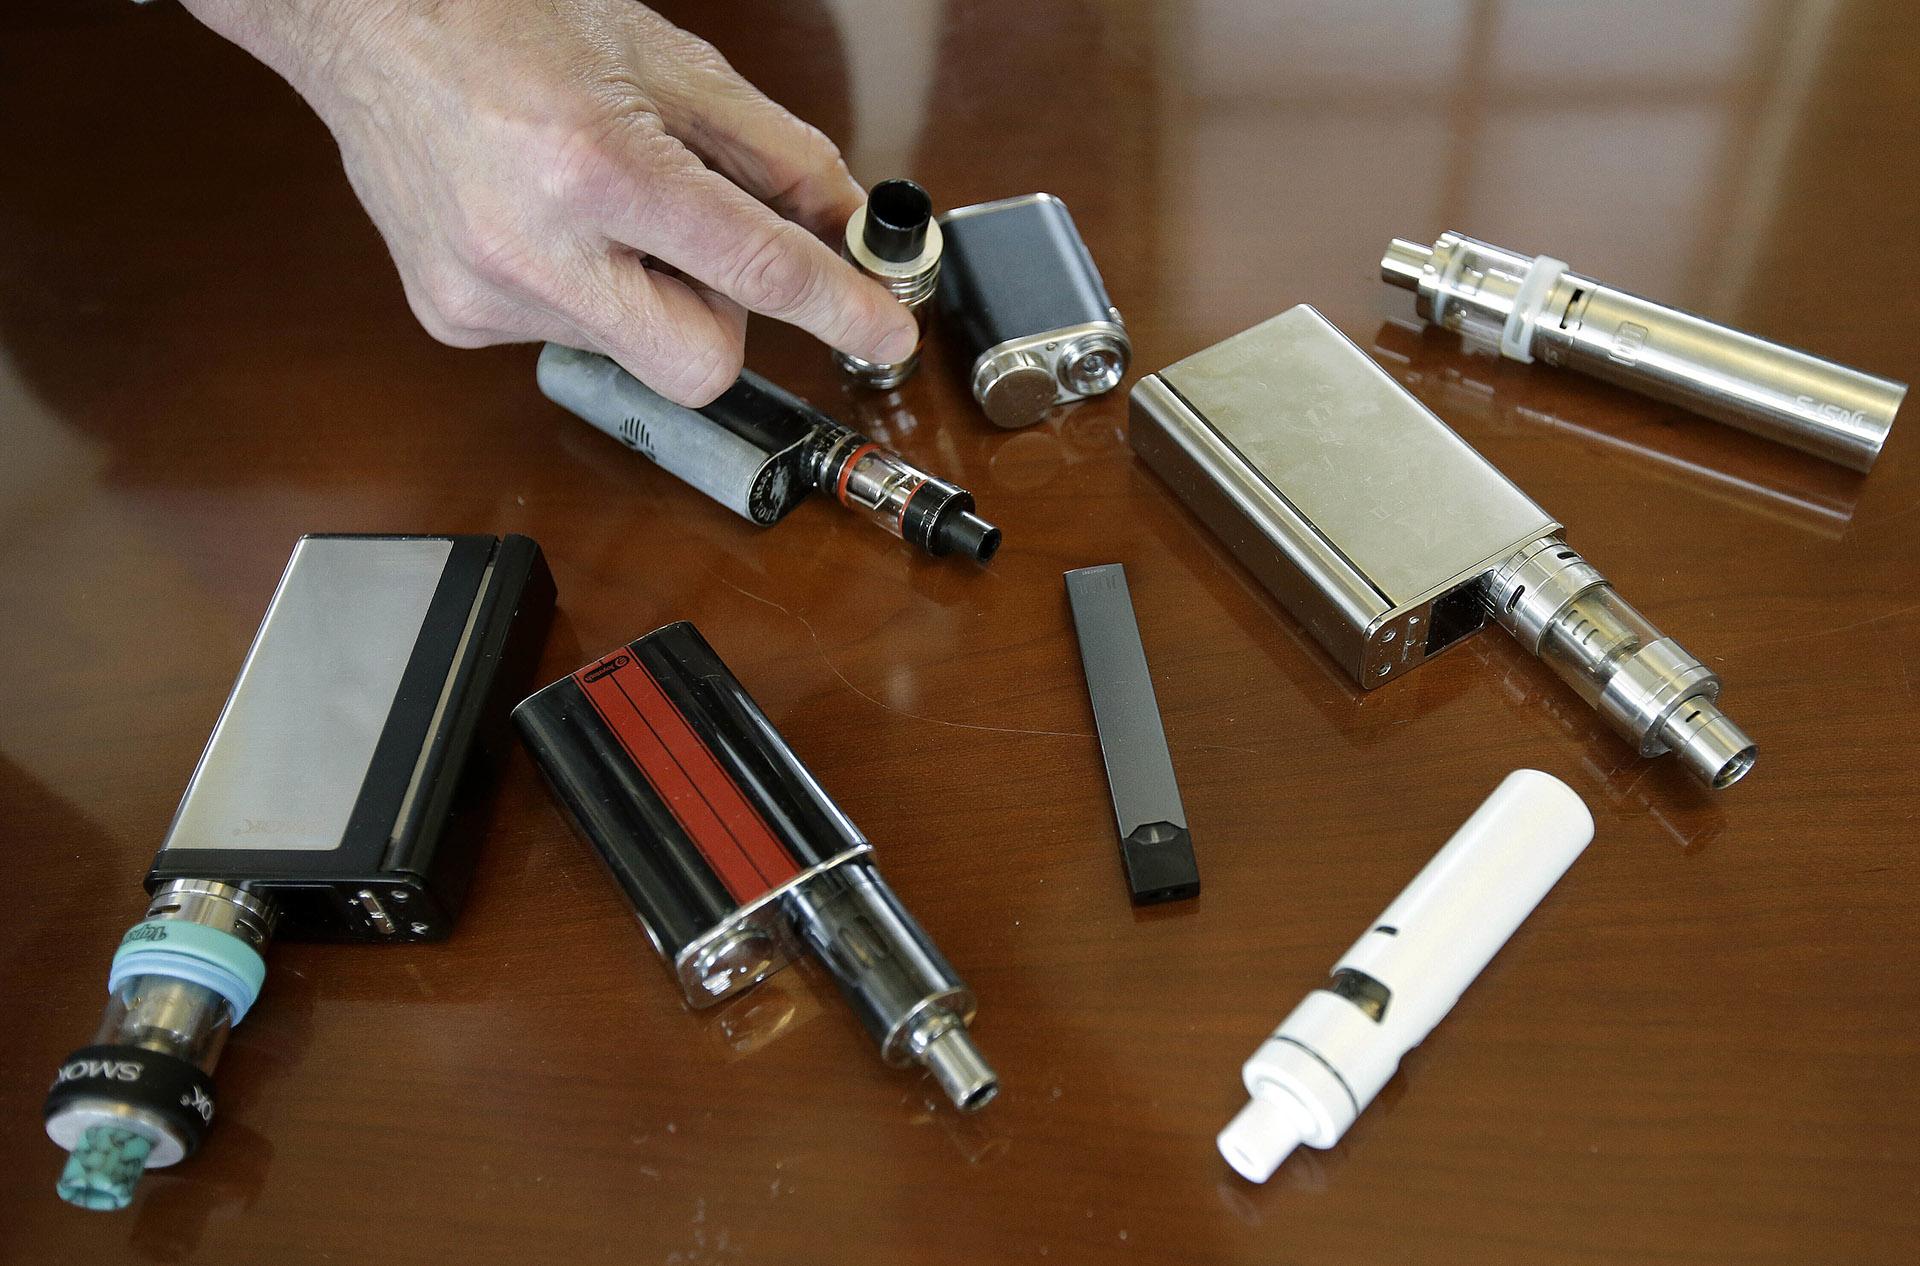 In this Tuesday, April 10, 2018 photo, a high school principal displays vaping devices that were confiscated from students at the school in Massachusetts. (AP Photo / Steven Senne)